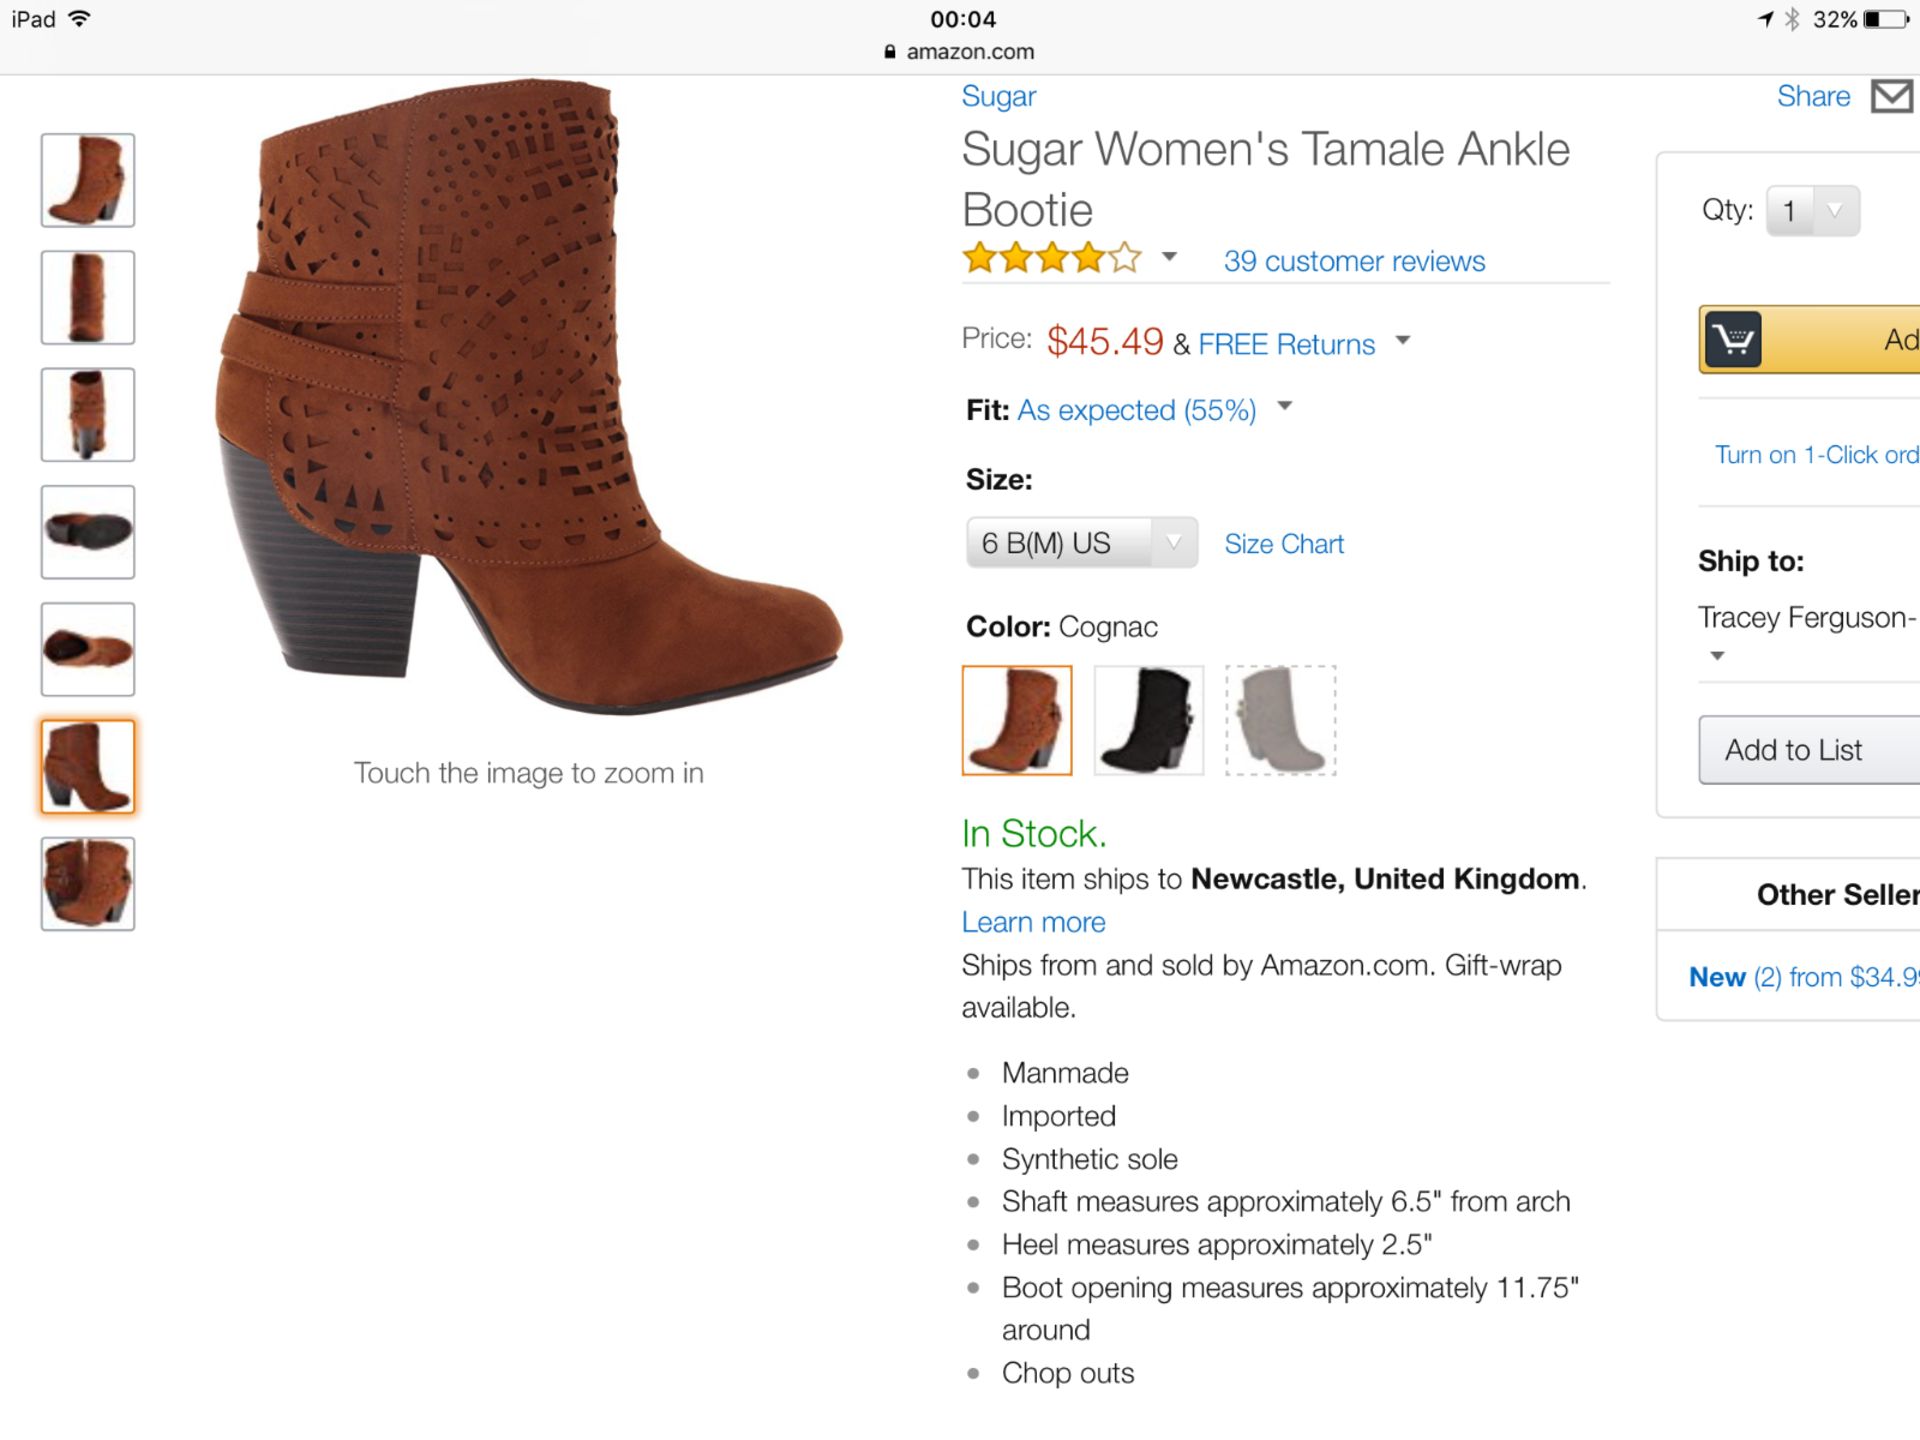 Sugar Women's Tamale Ankle Bootie, Size US Eur 36 UK 4 (New with box) [Ref: B-002] - Image 6 of 8